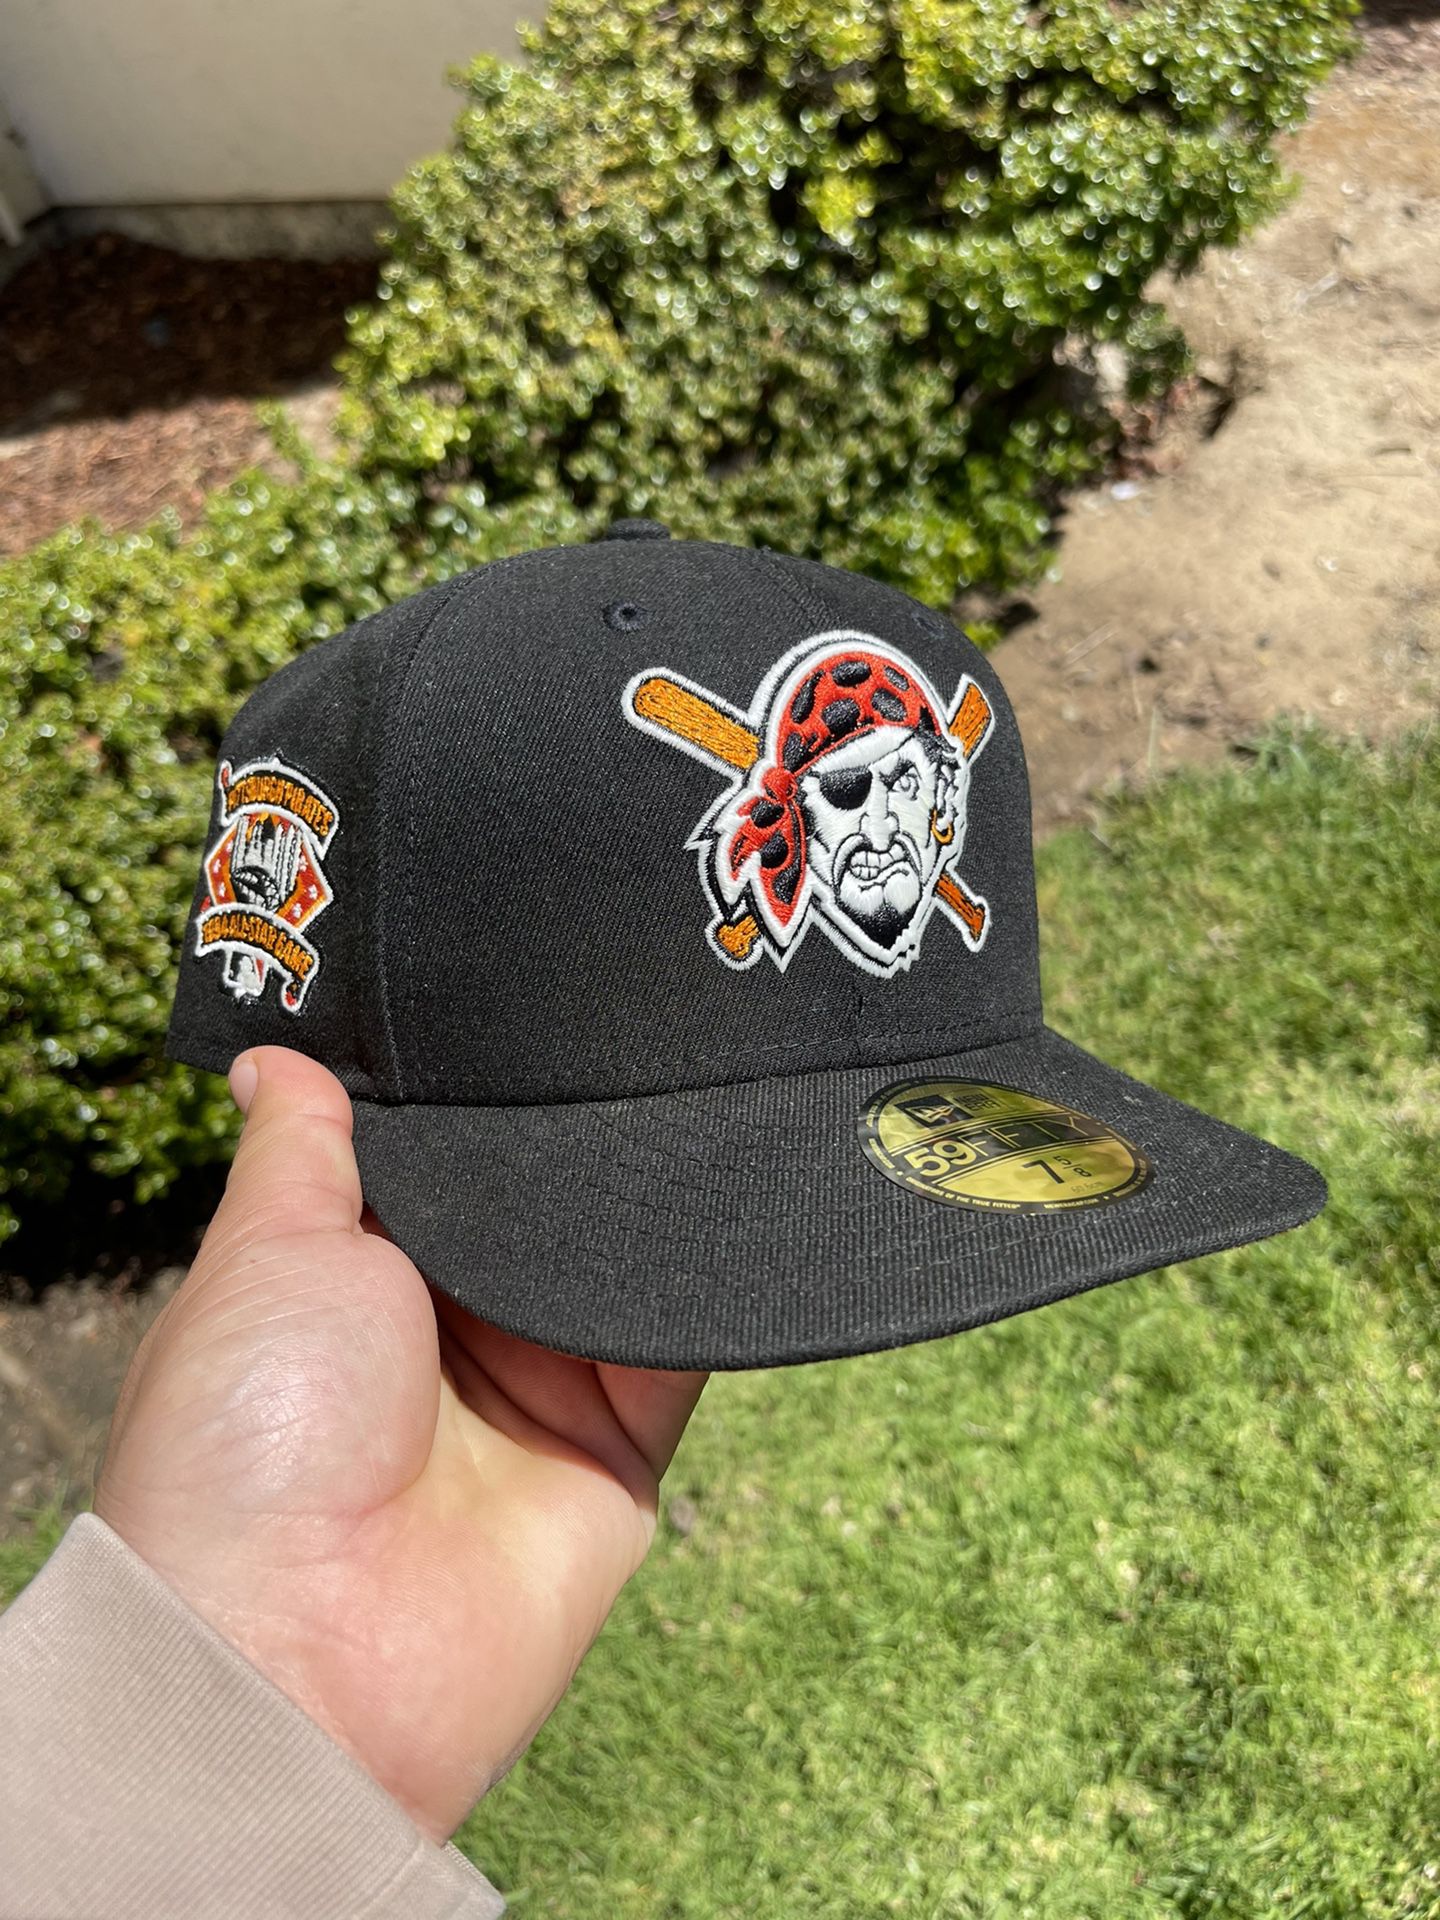 Pittsburgh Pirates Fitted Hat for Sale in Corral De Tie, CA - OfferUp